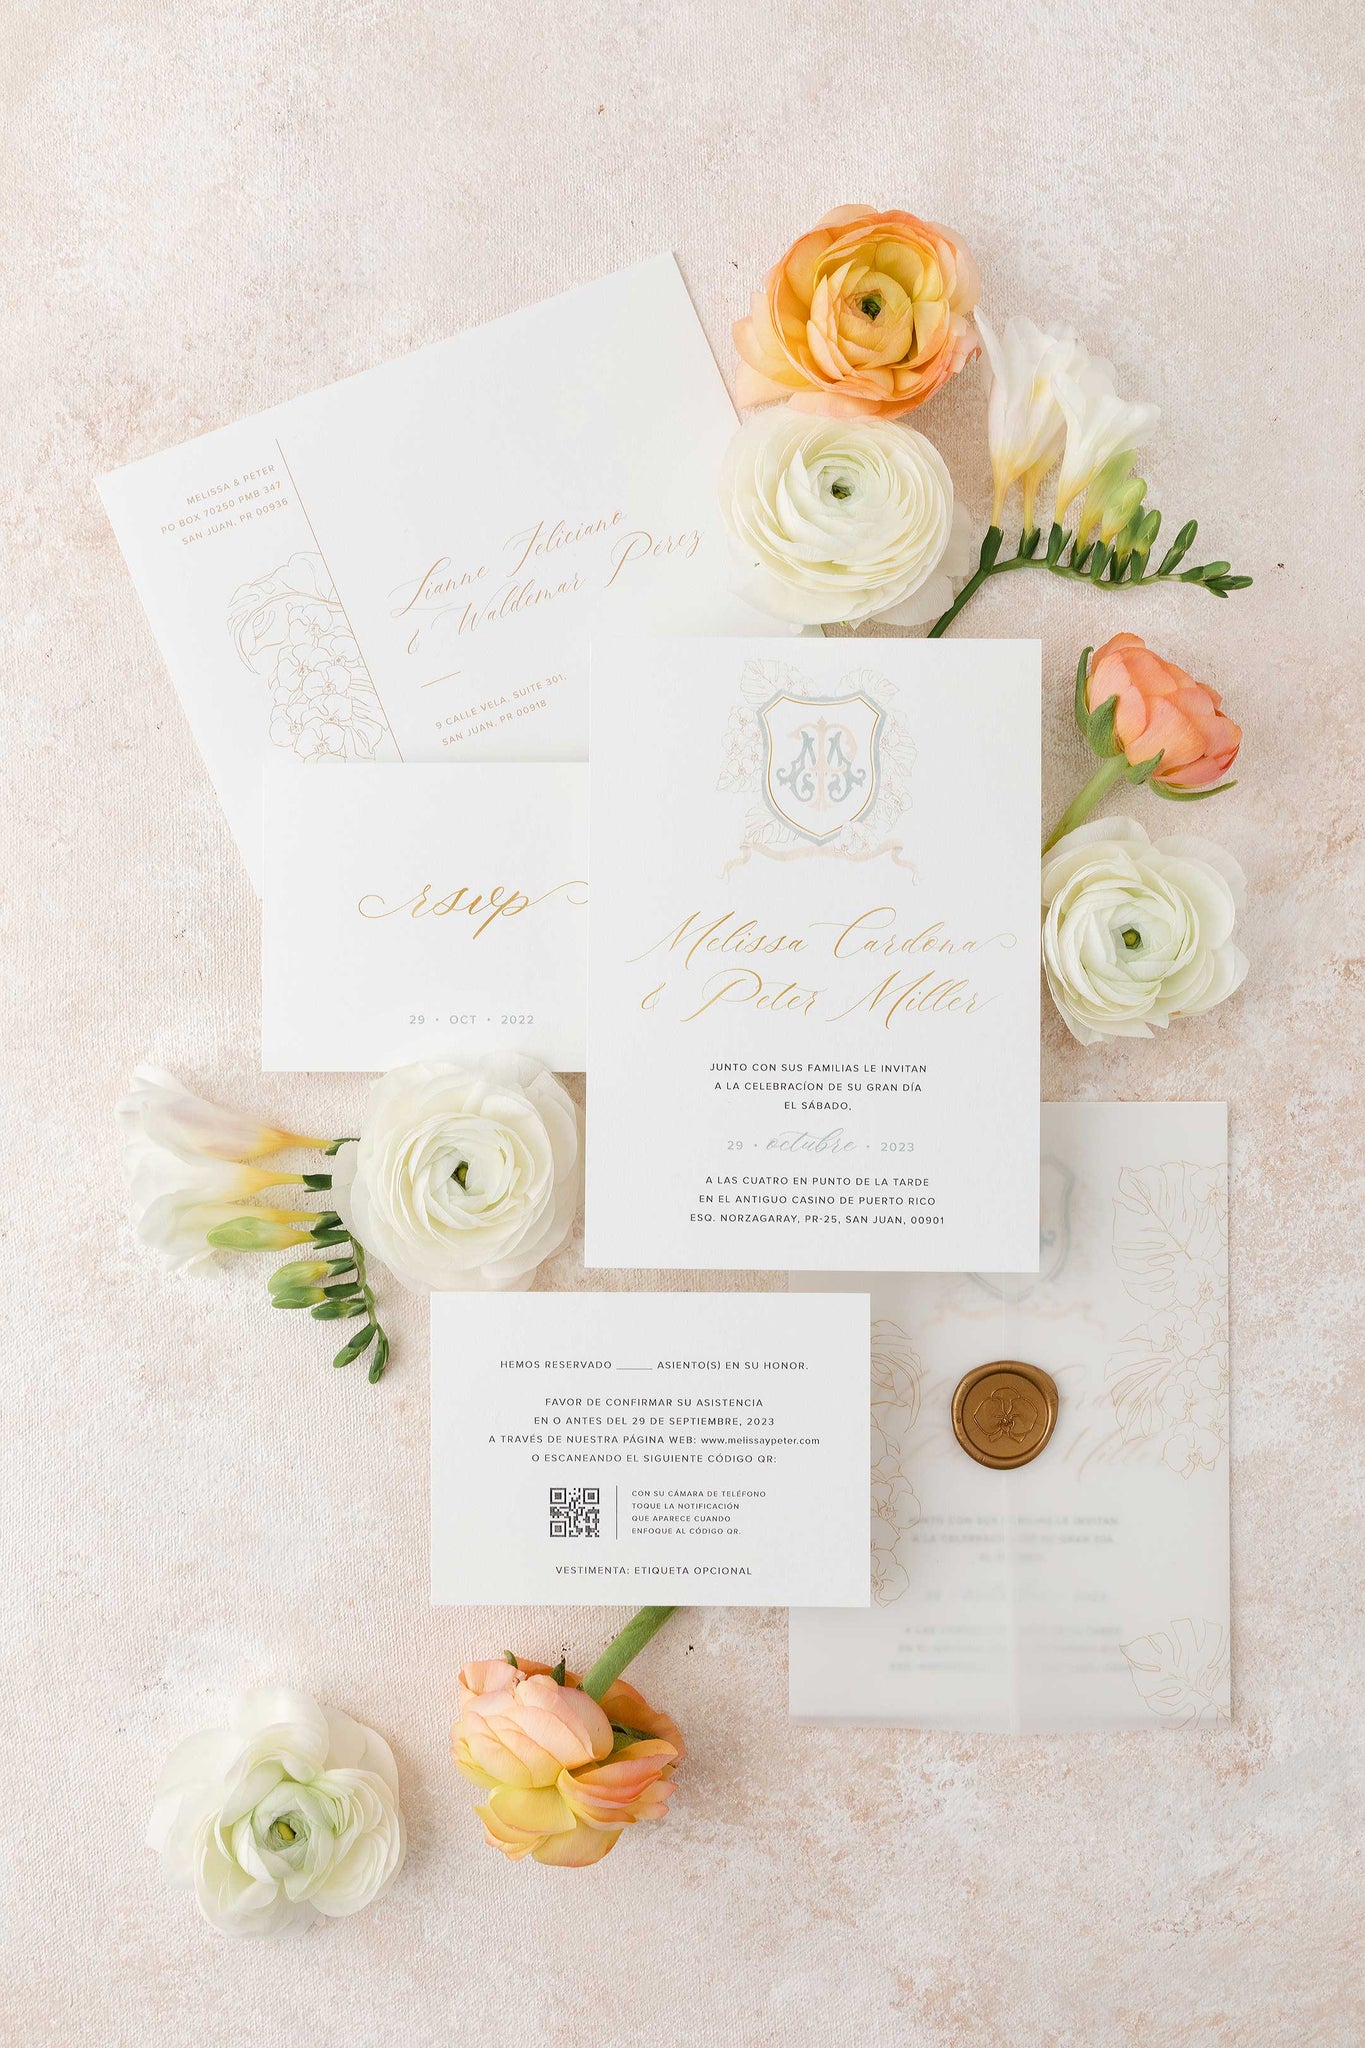 Wedding Invitation with Tropical Monogram inspired on the Wedding Decor with Orchids and Monstera Leaves